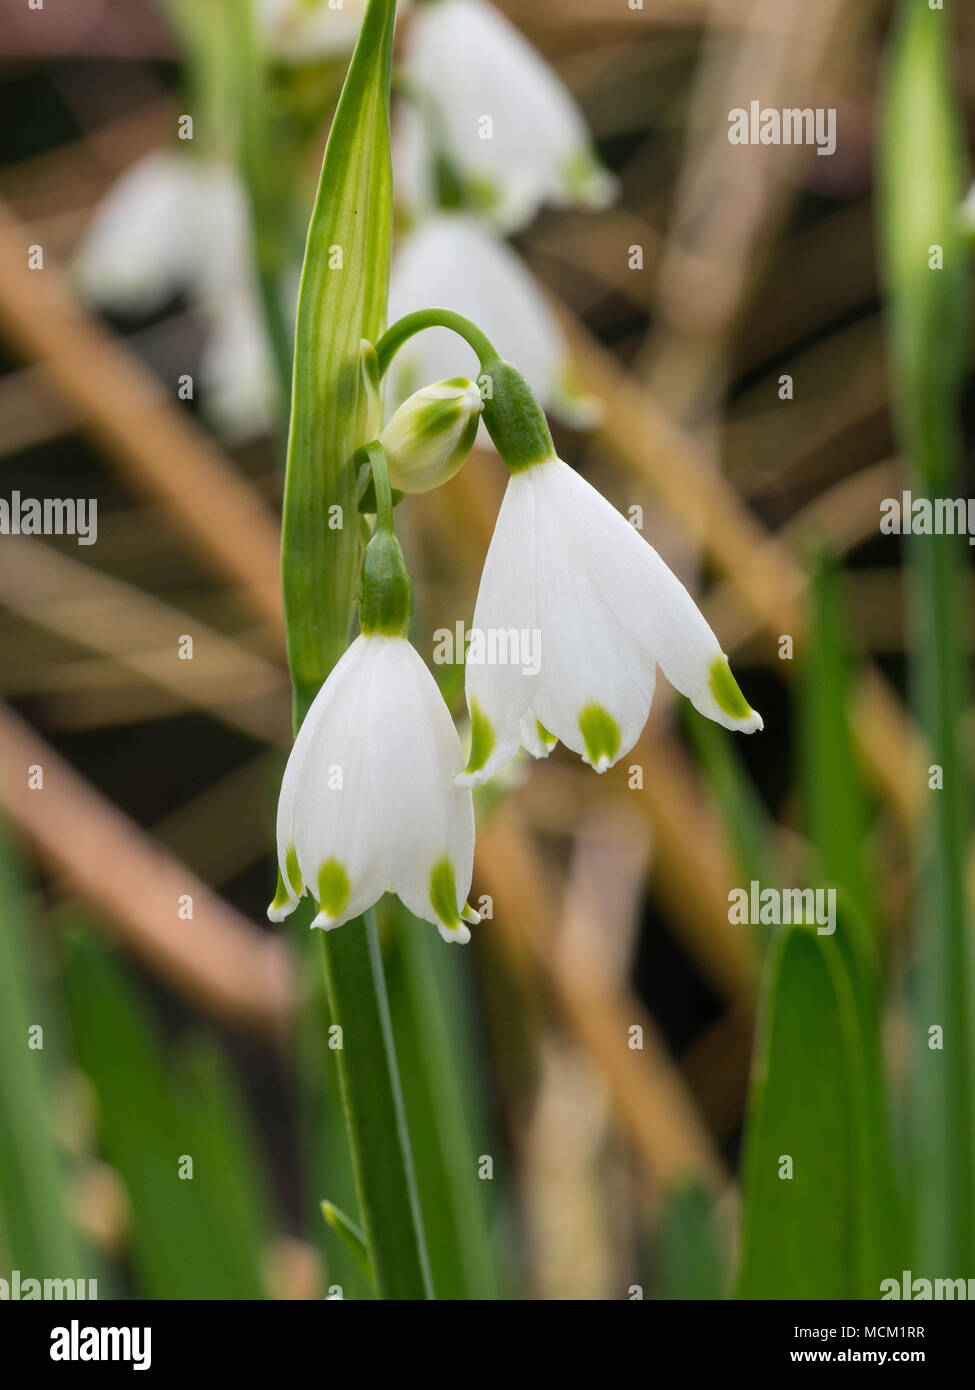 A close up of the white and green flowers of Leucojum aestivum 'Gravetye Giant' Stock Photo